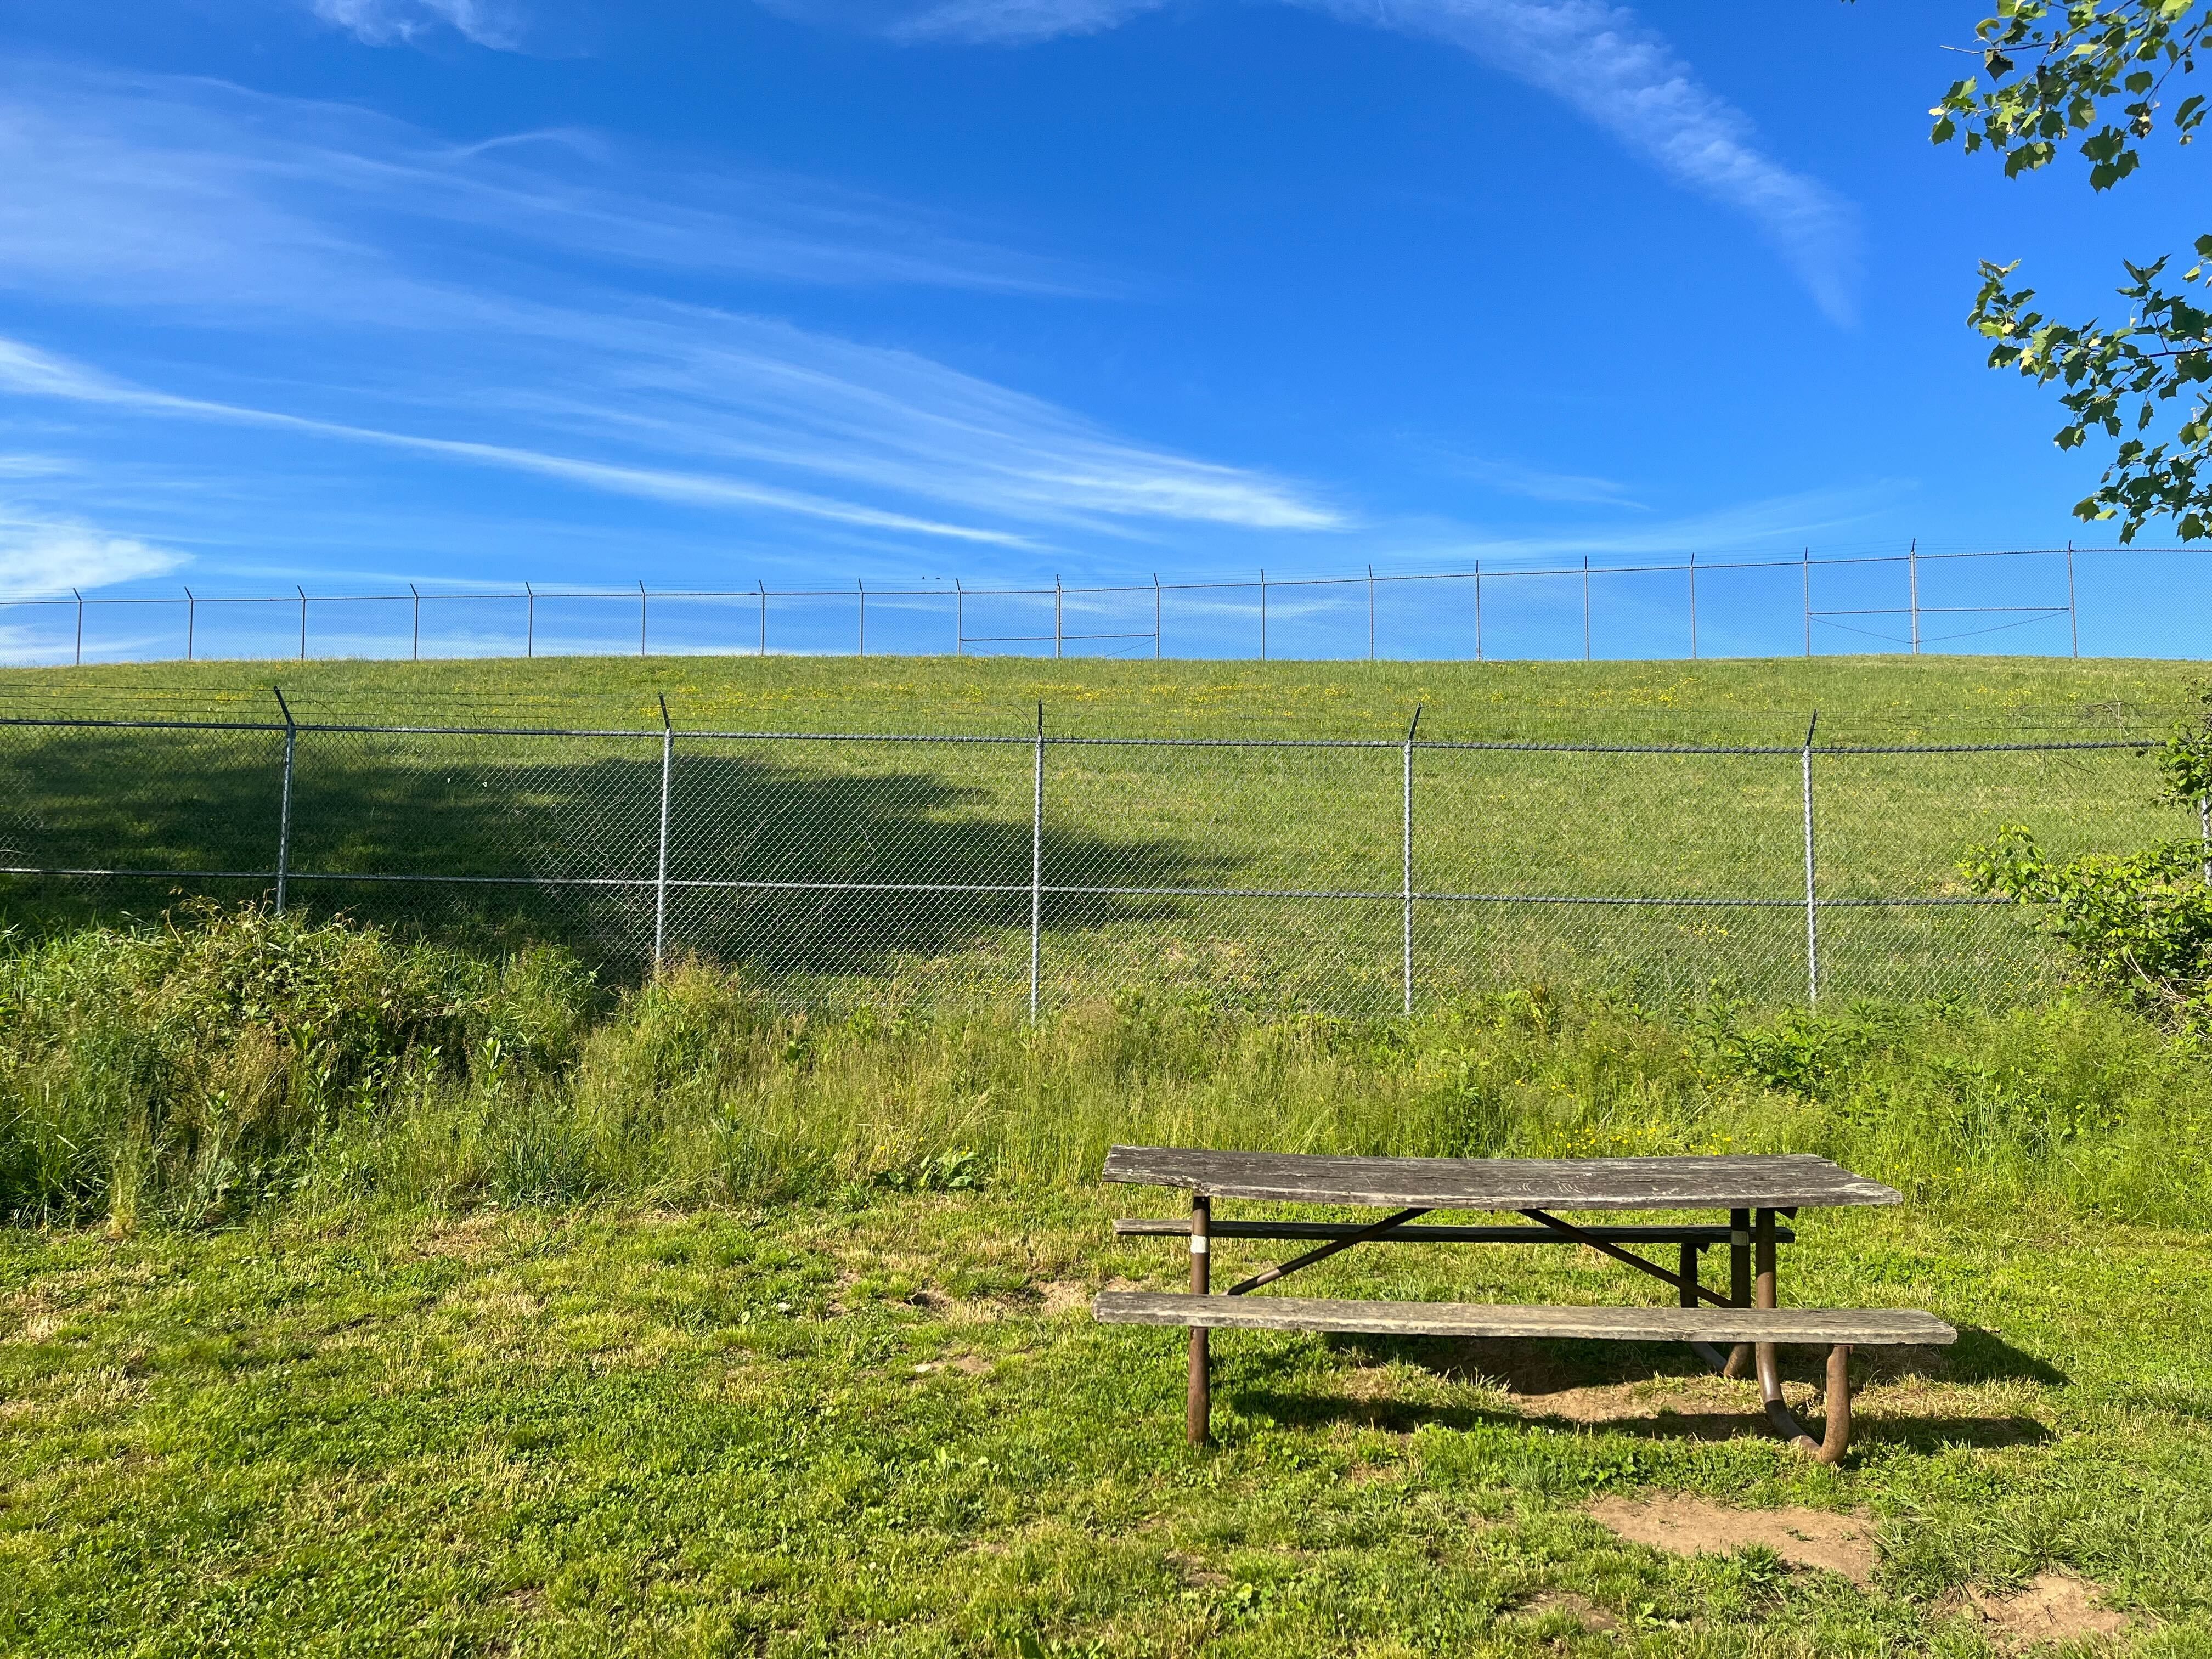 A picnic table is framed on the right side of picture, with grass and a blue sky in the background